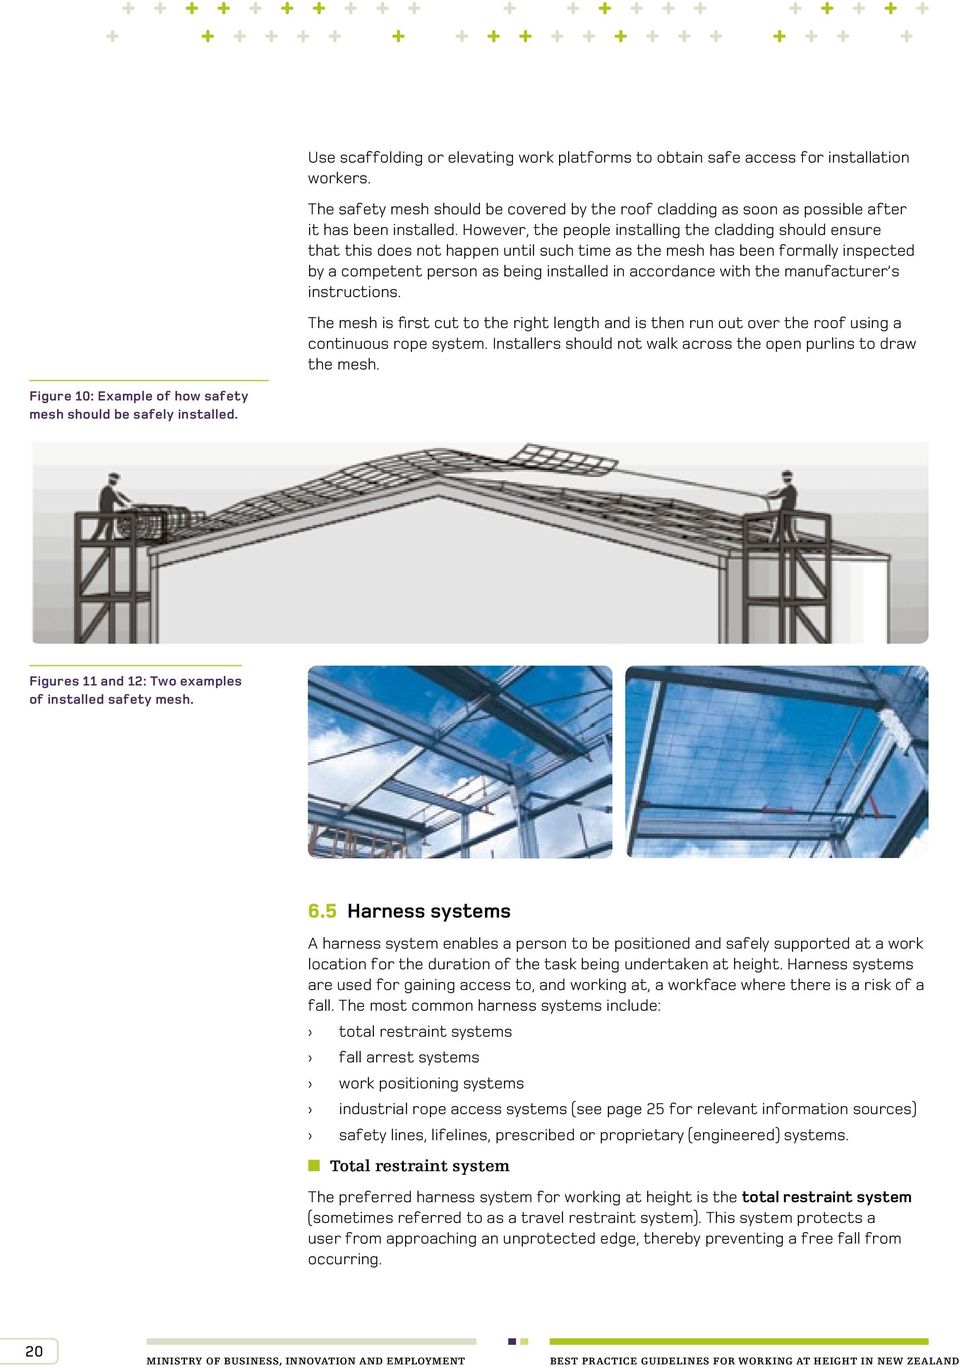 the manufacturer s instructions. The mesh is first cut to the right length and is then run out over the roof using a continuous rope system.